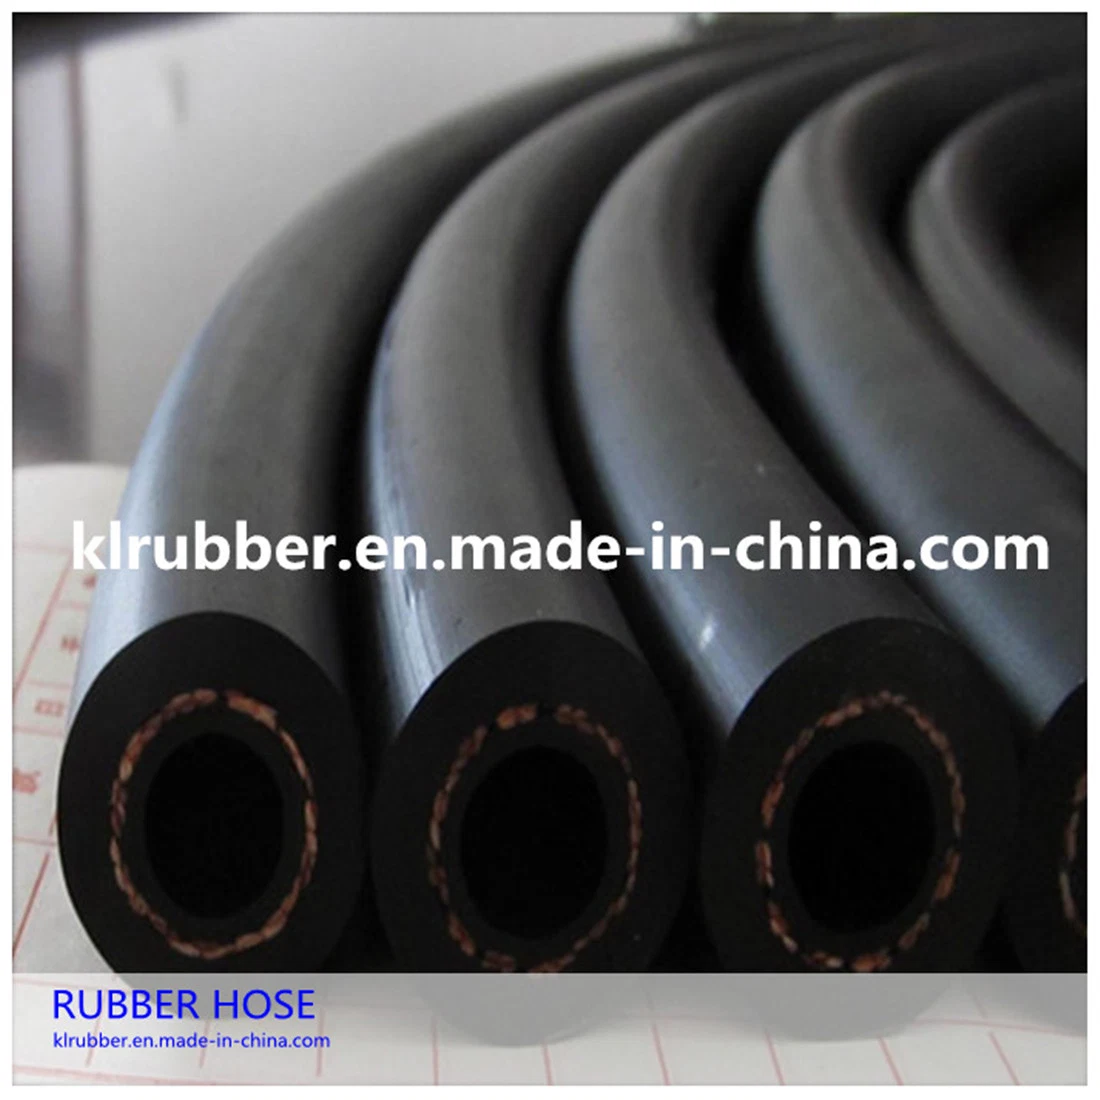 SAE J1402 High Pressure Rubber Air Brake Hose with Hydraulic Fittings